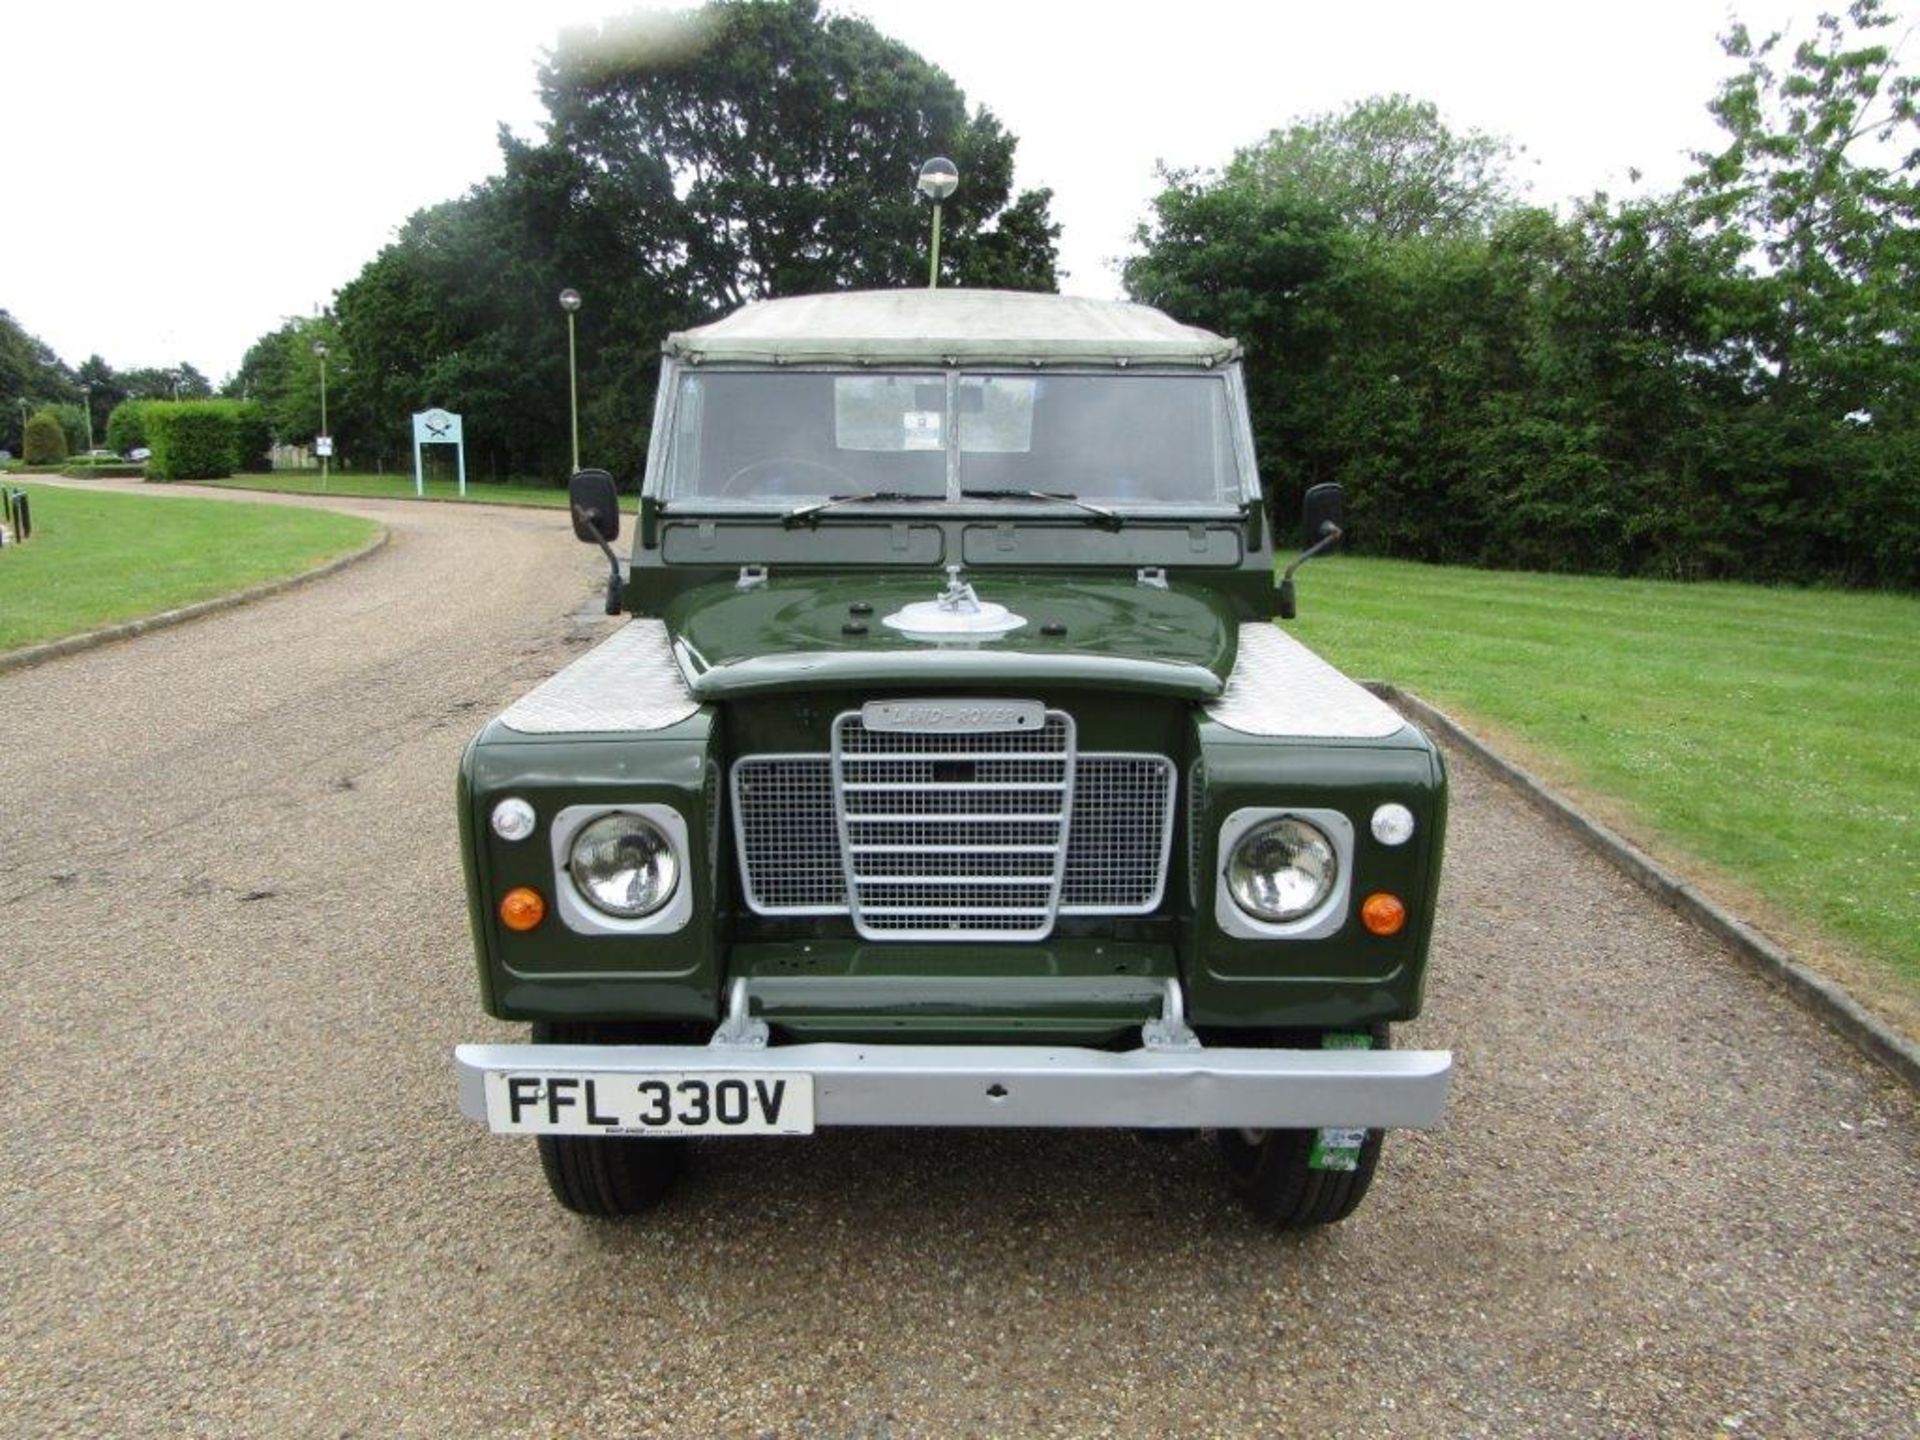 1980 Land Rover Series III - Image 2 of 25